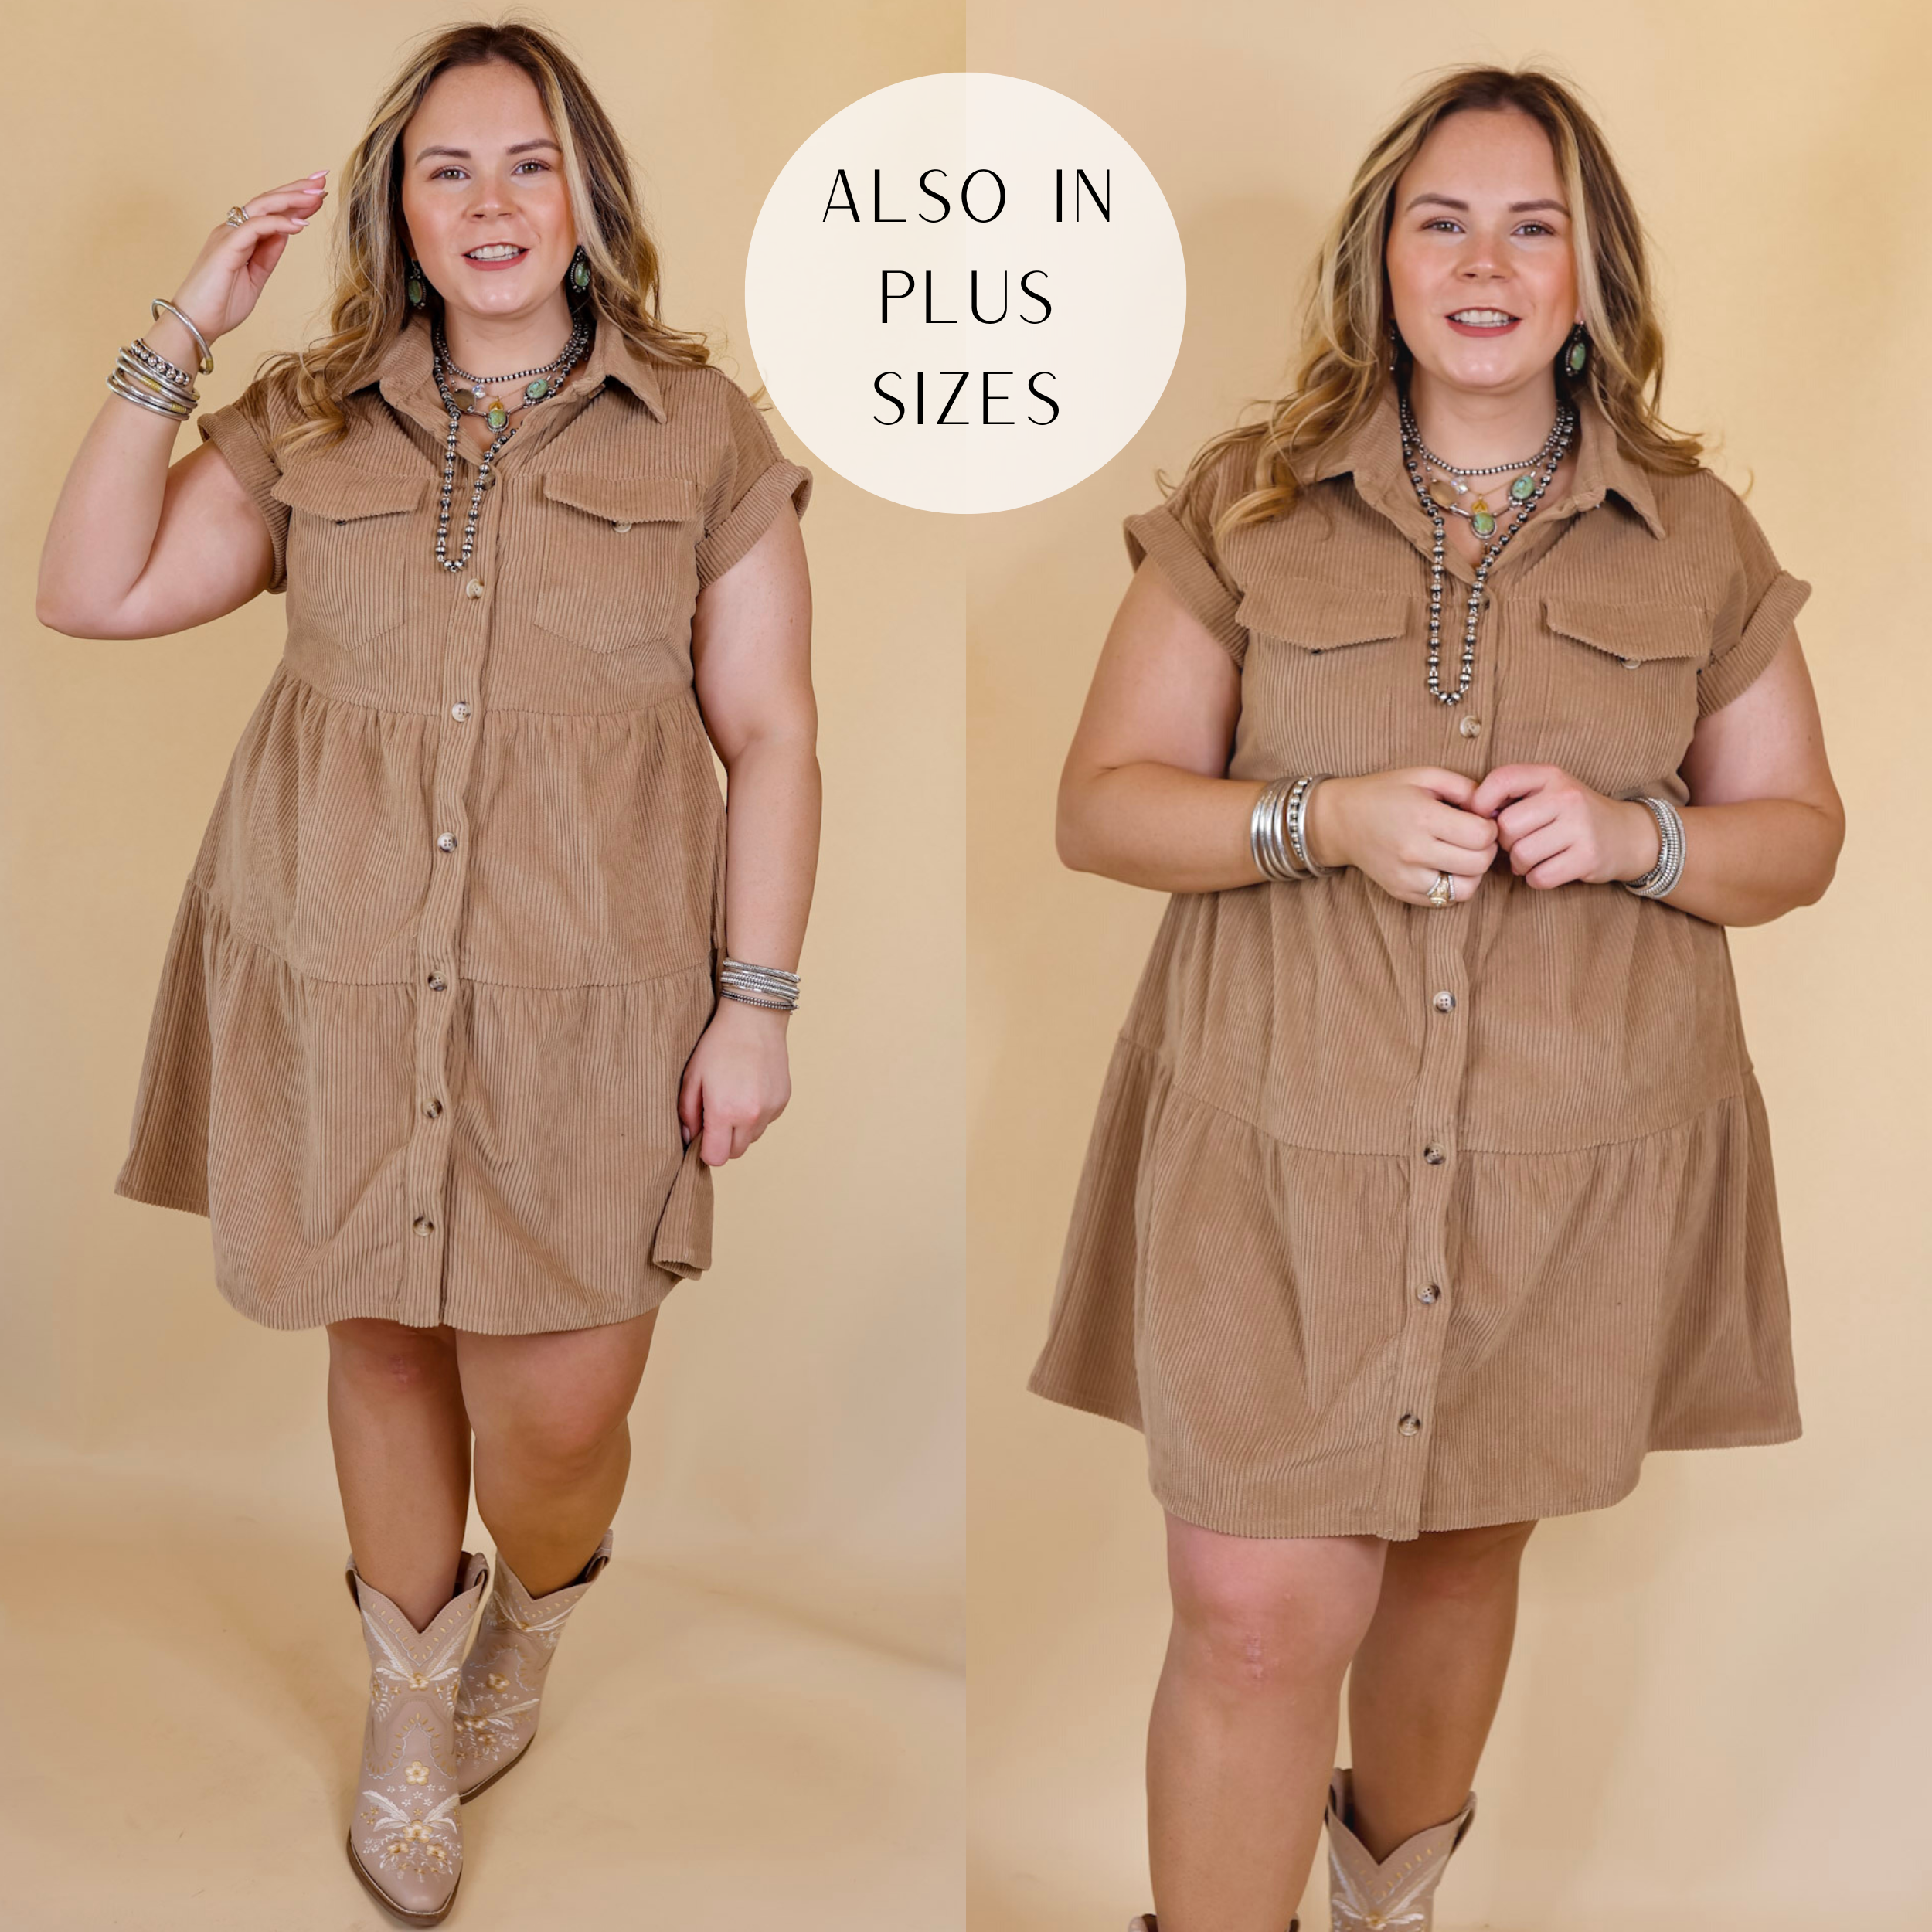 Model is wearing a button down, corduroy dress in taupe. Model has this dress paired with boots and genuine navajo jewelry. Background is solid tan. 